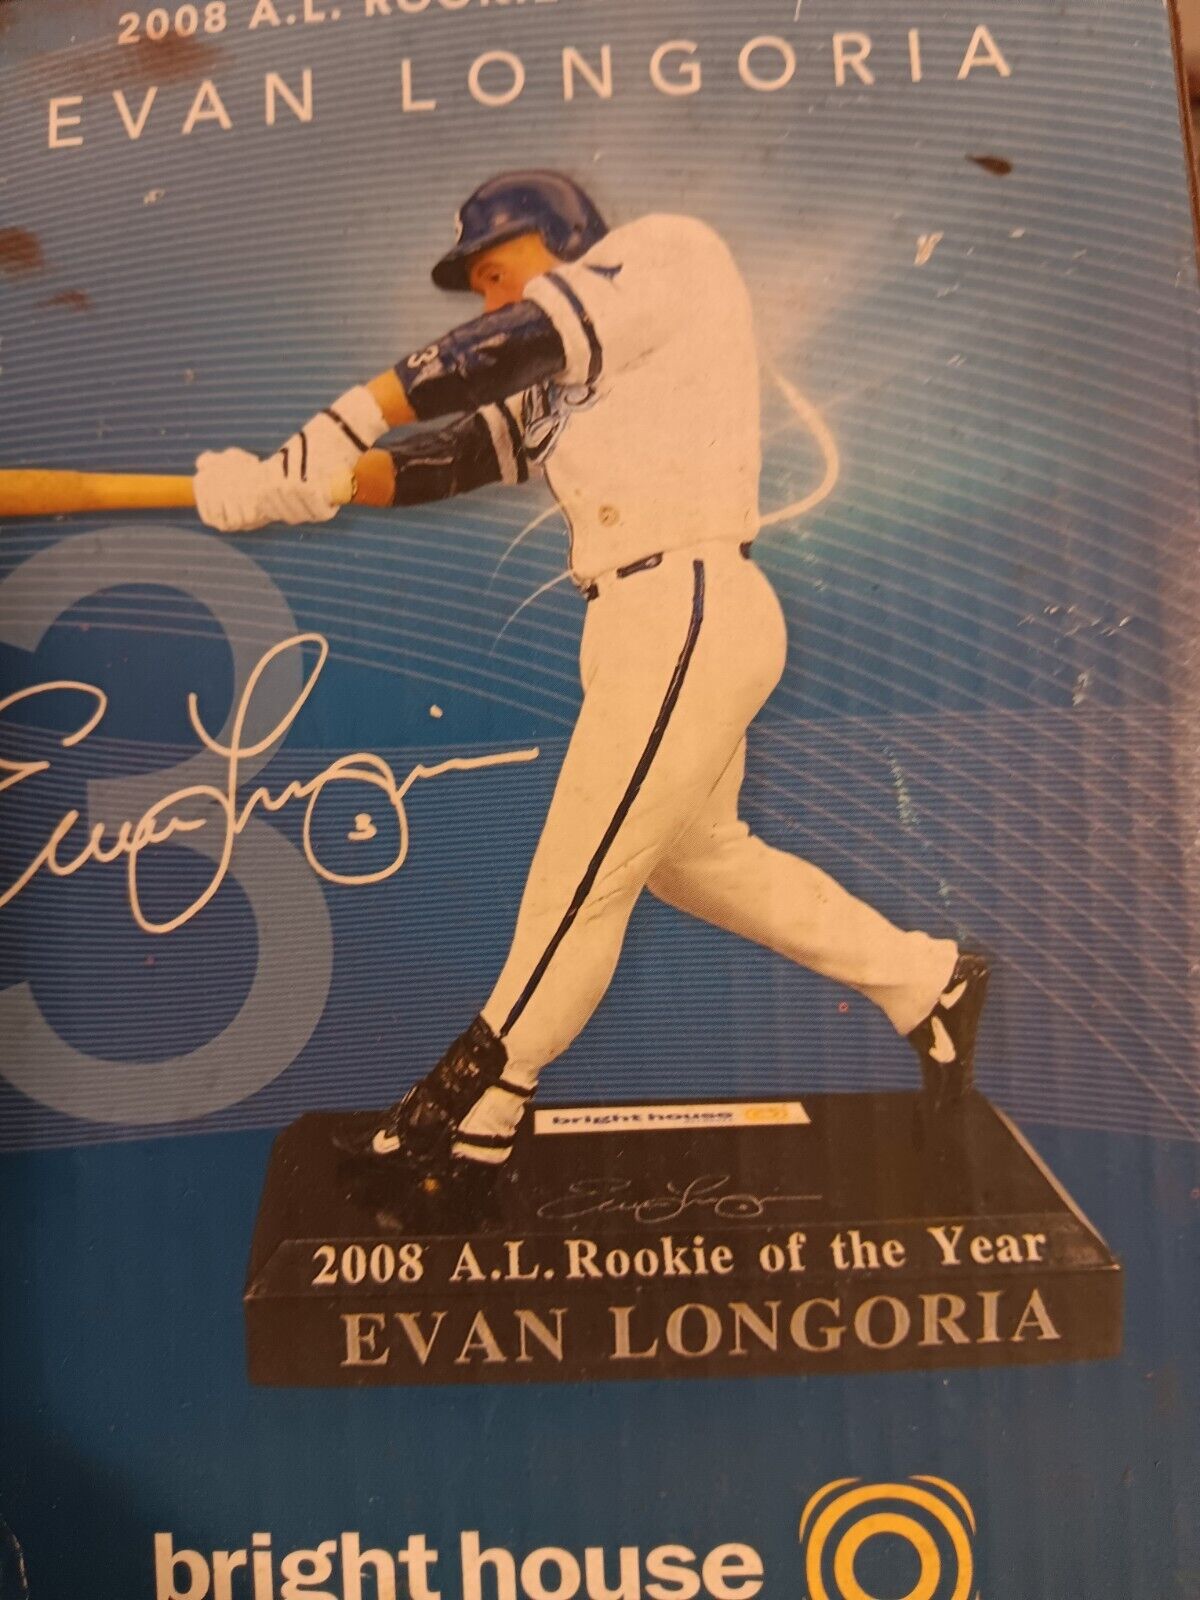 Evan Longoria Autographed Action Figure Rookie of the year